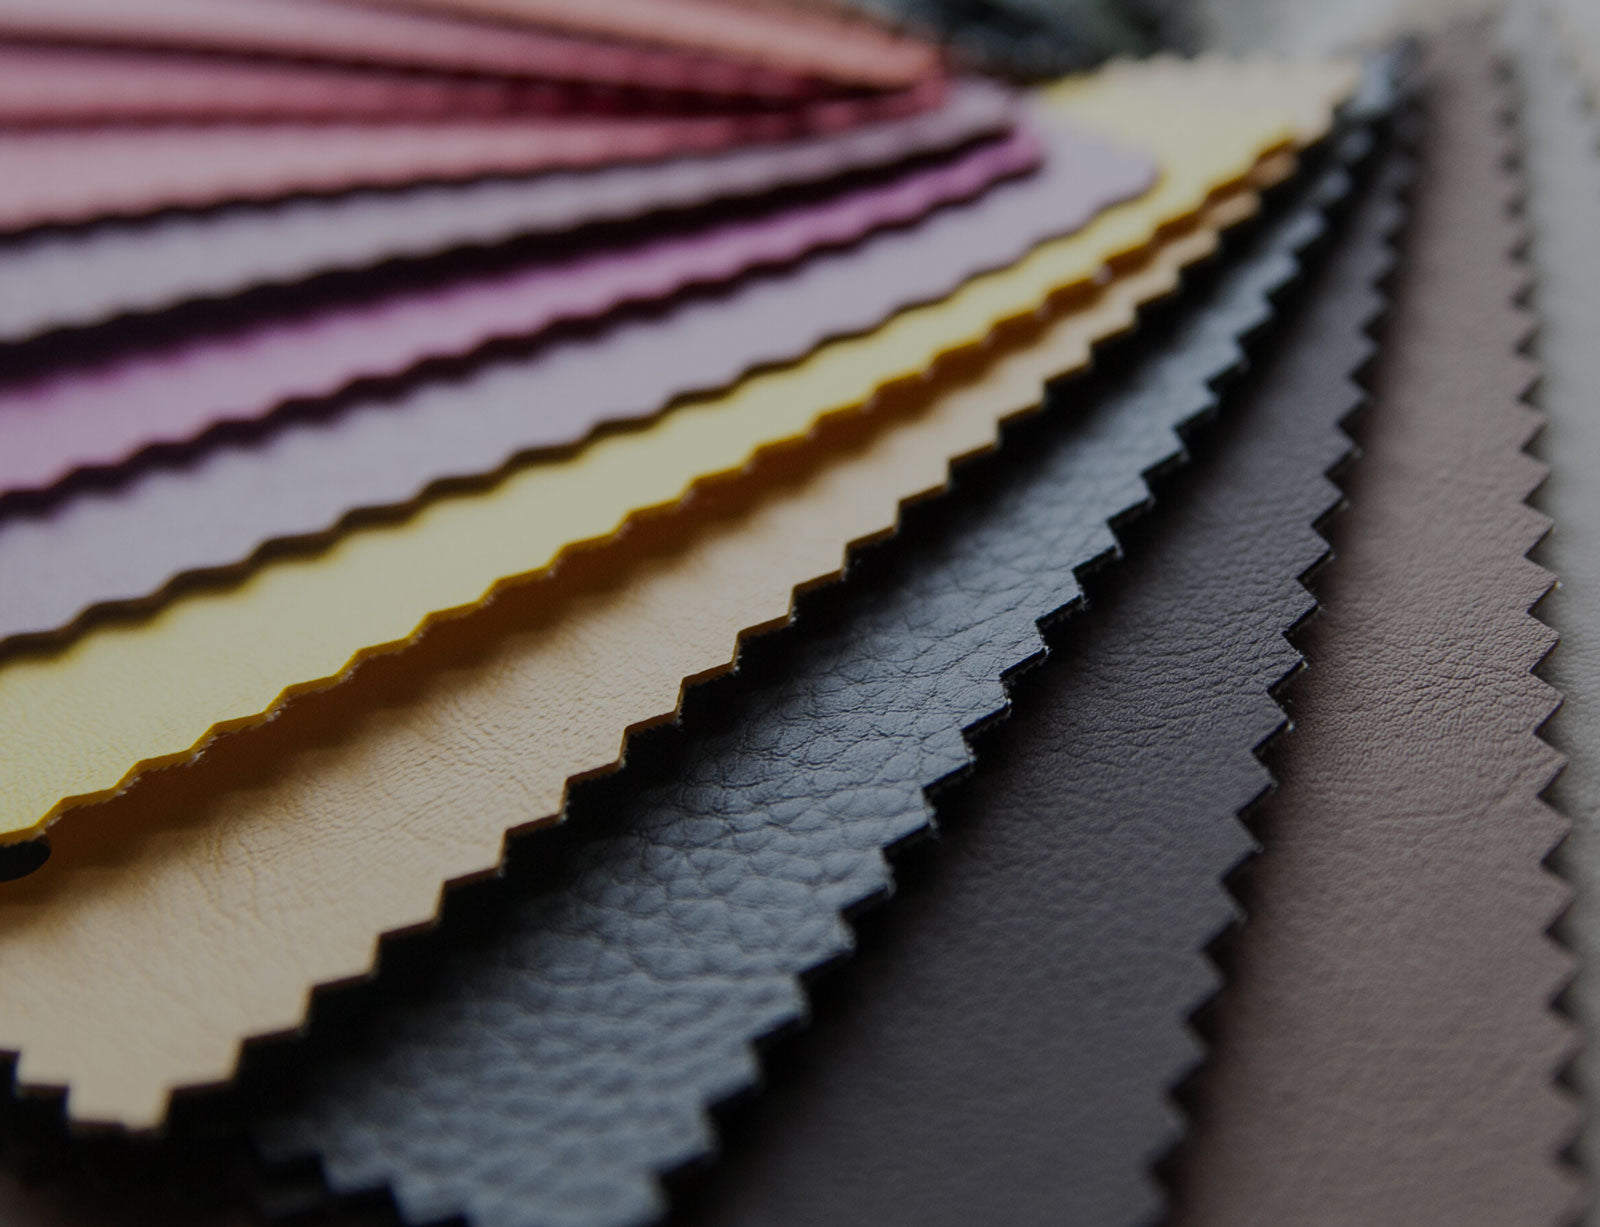 An image displaying a range of leathers in a splayed display